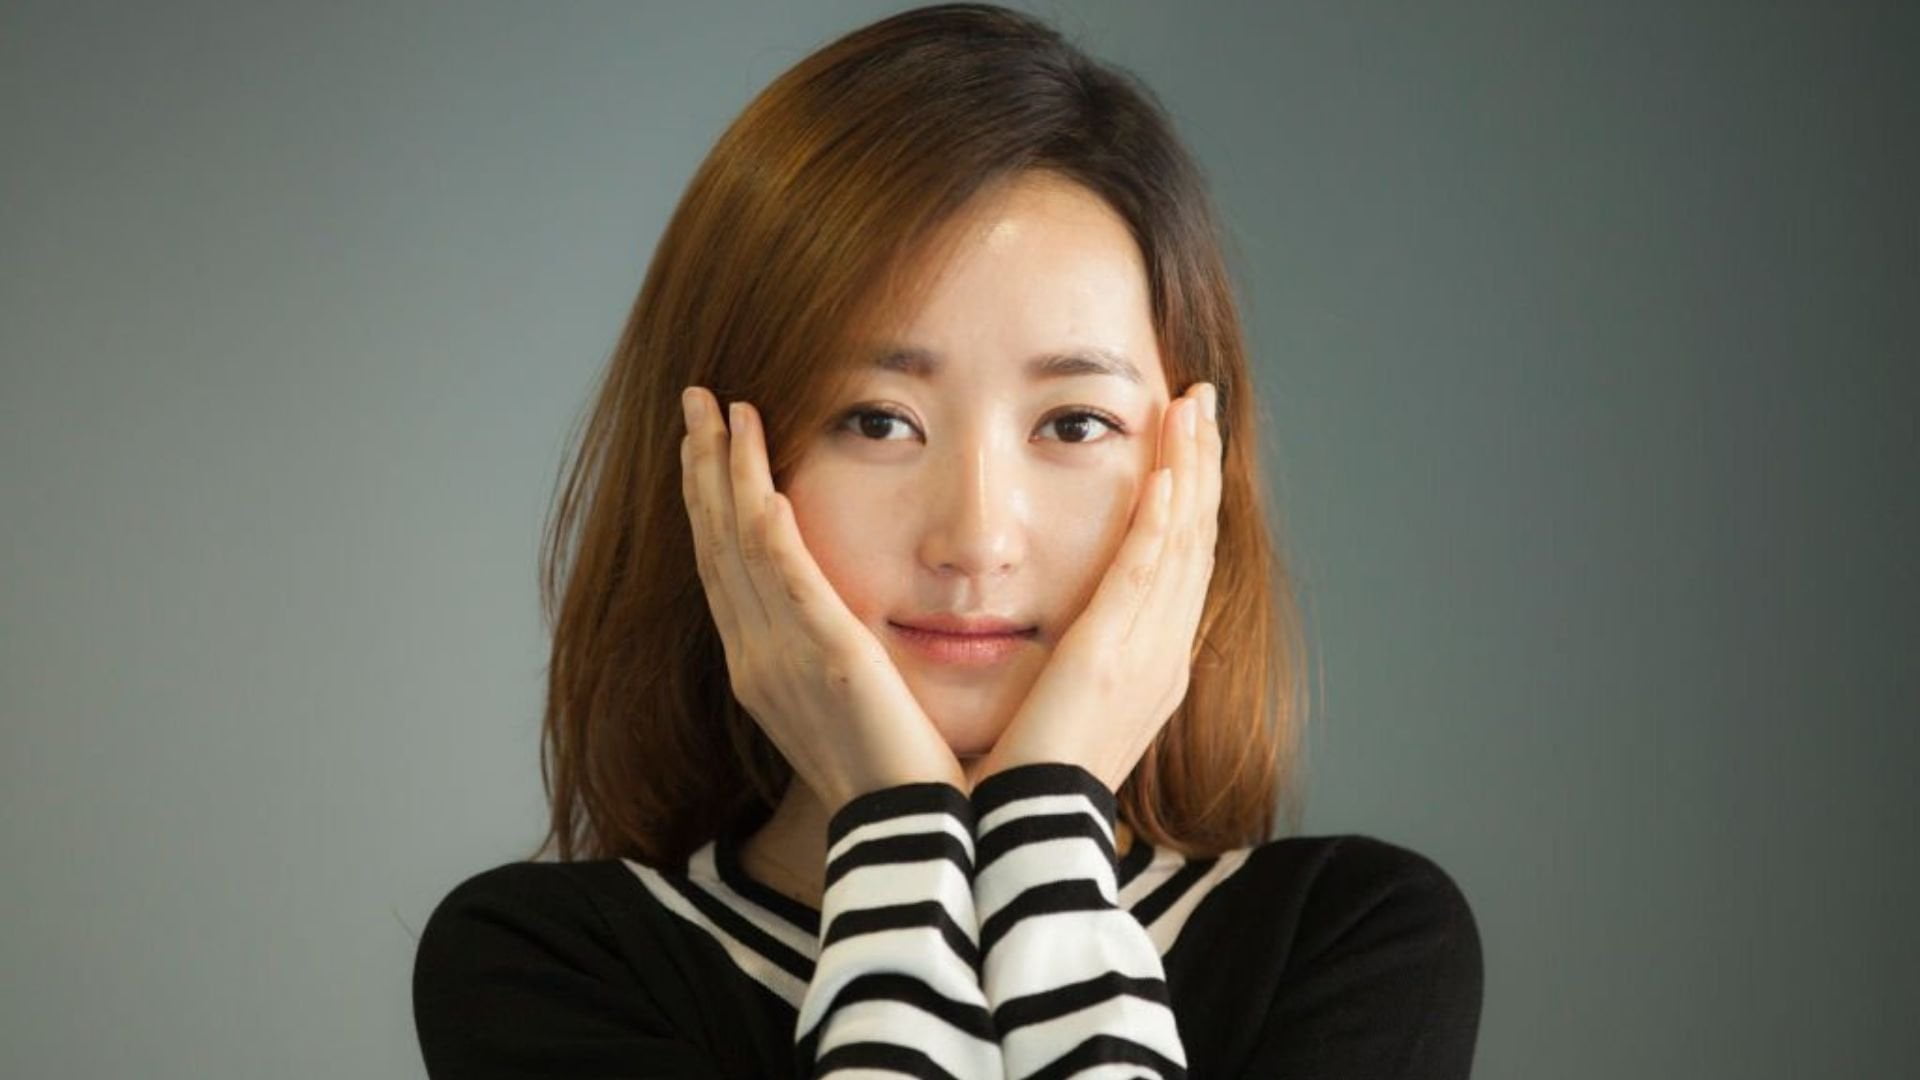 Yeonmi Park Plastic Surgery: Did She Have Breast Implants?